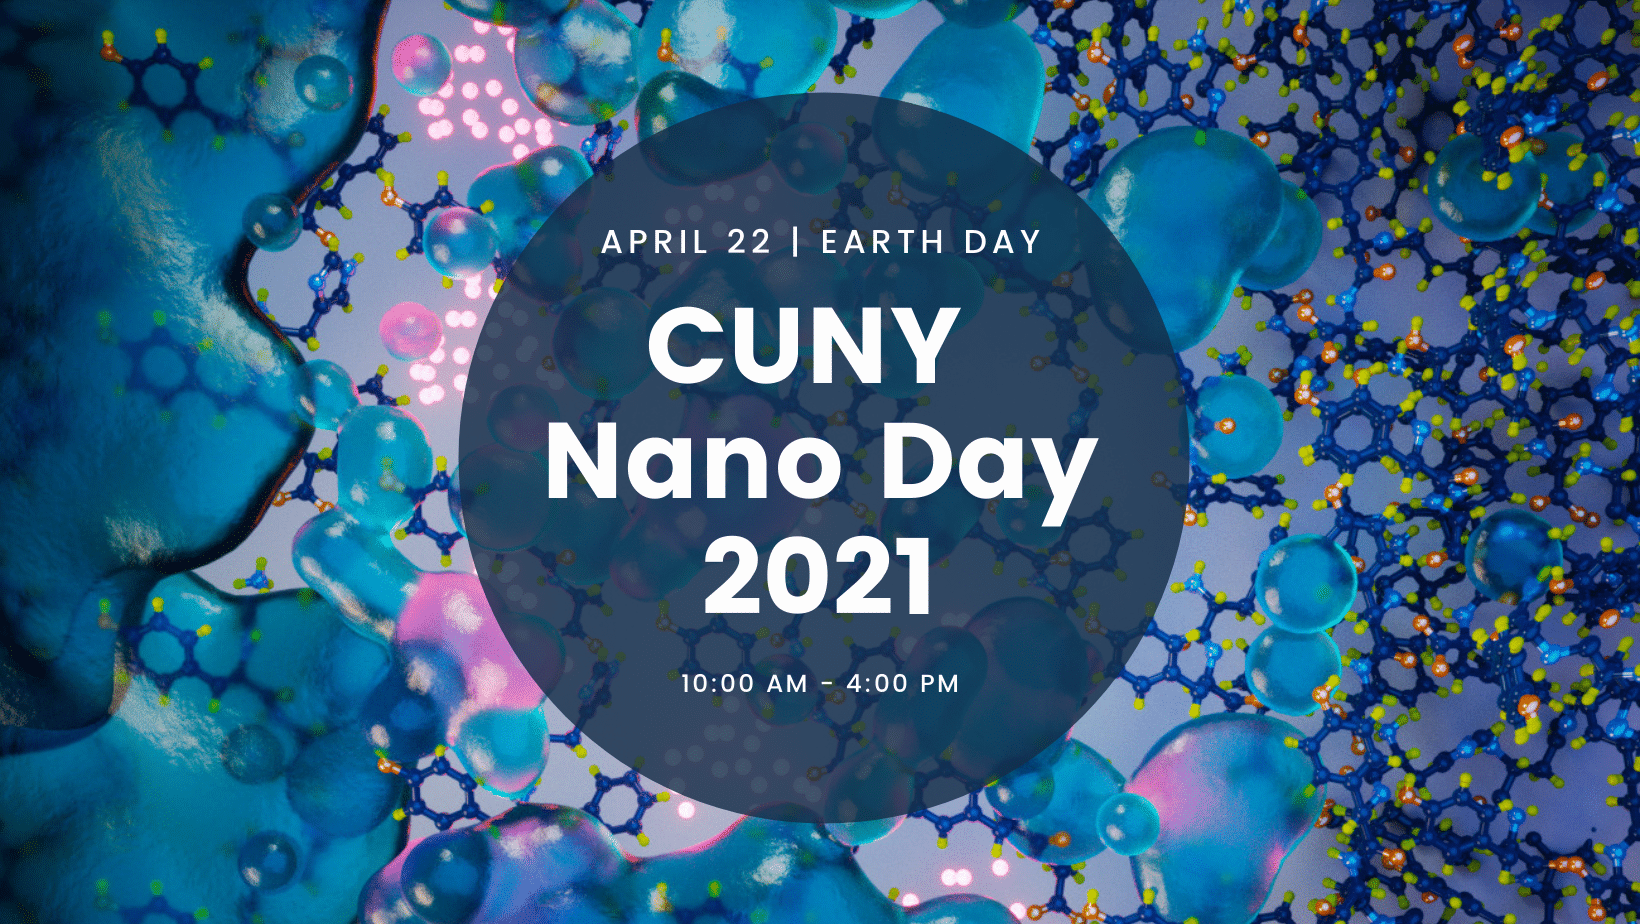 CUNY Nano Day 2021 will take palce on Earth Day, April 22.